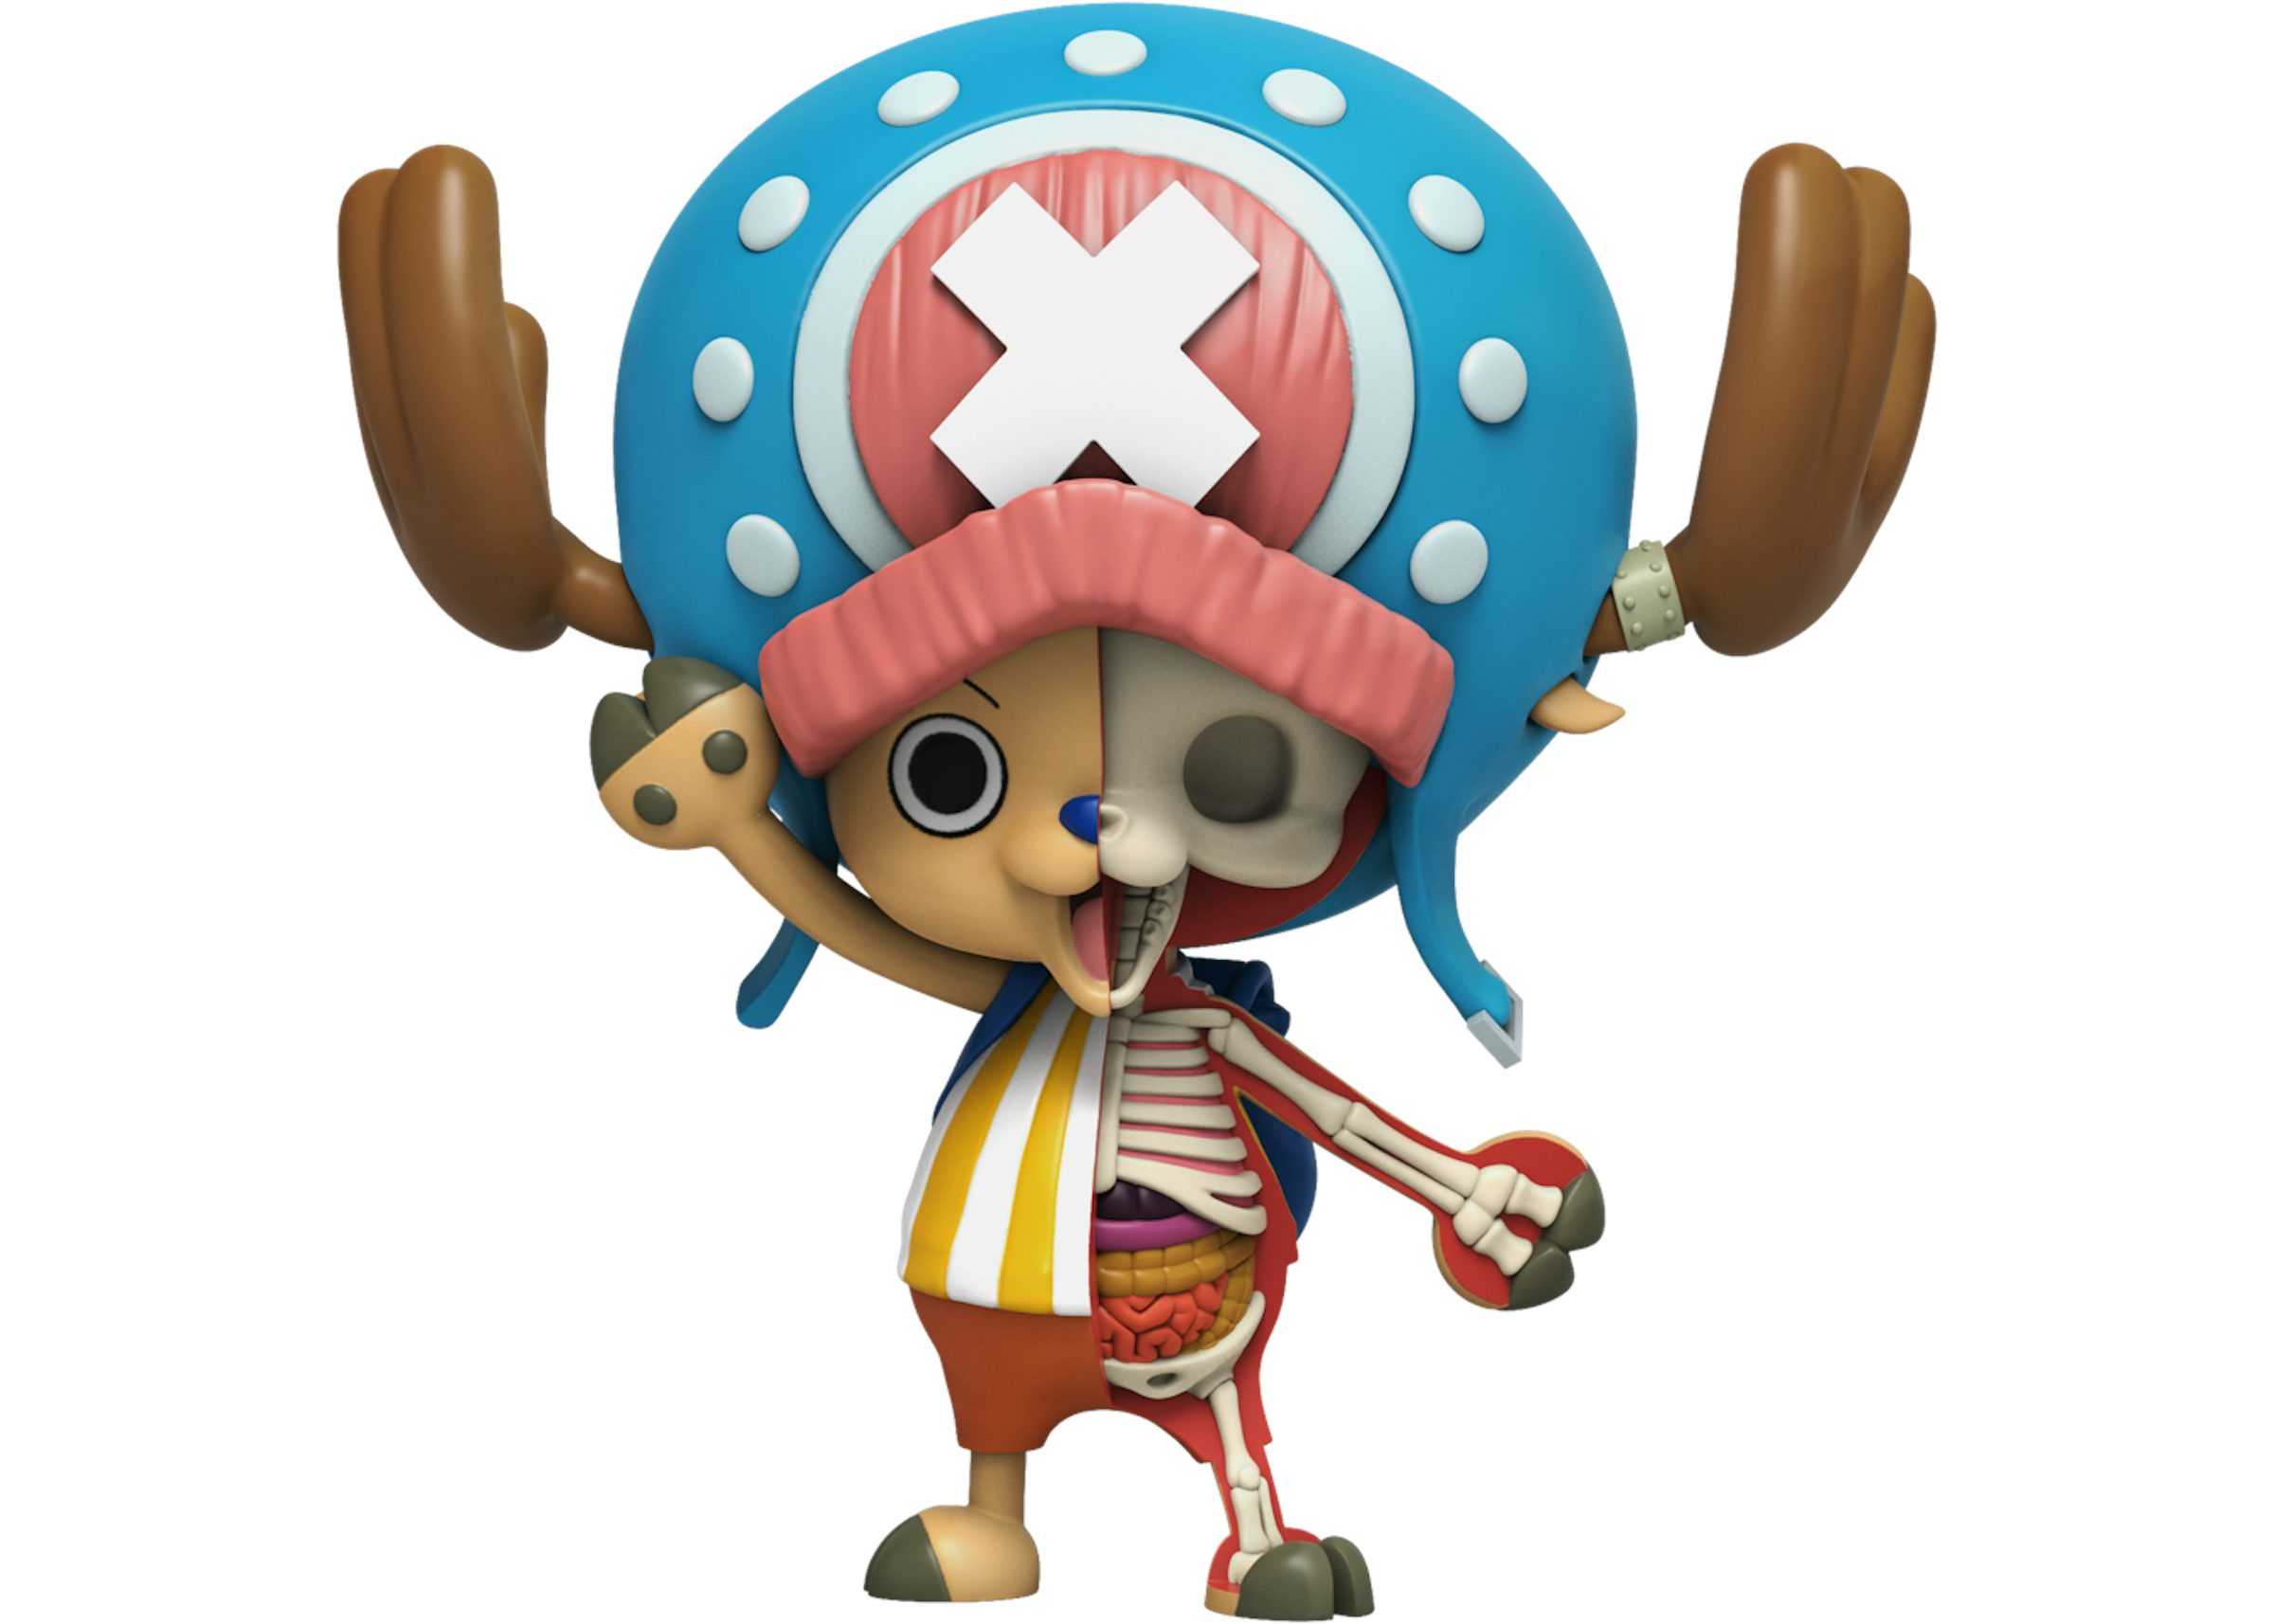 https://images.stockx.com/images/Jason-Freeny-Hidden-Dissectables-One-Piece-Chopper-Figure.png?fit=fill&bg=FFFFFF&w=1200&h=857&fm=jpg&auto=compress&dpr=2&trim=color&updated_at=1628601634&q=60